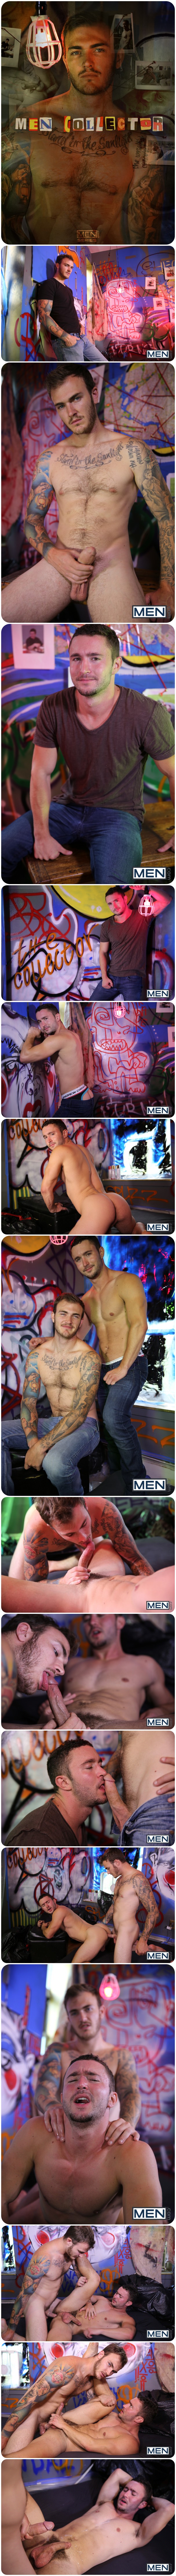 Men Collector - Christian Wilde and Colt Rivers